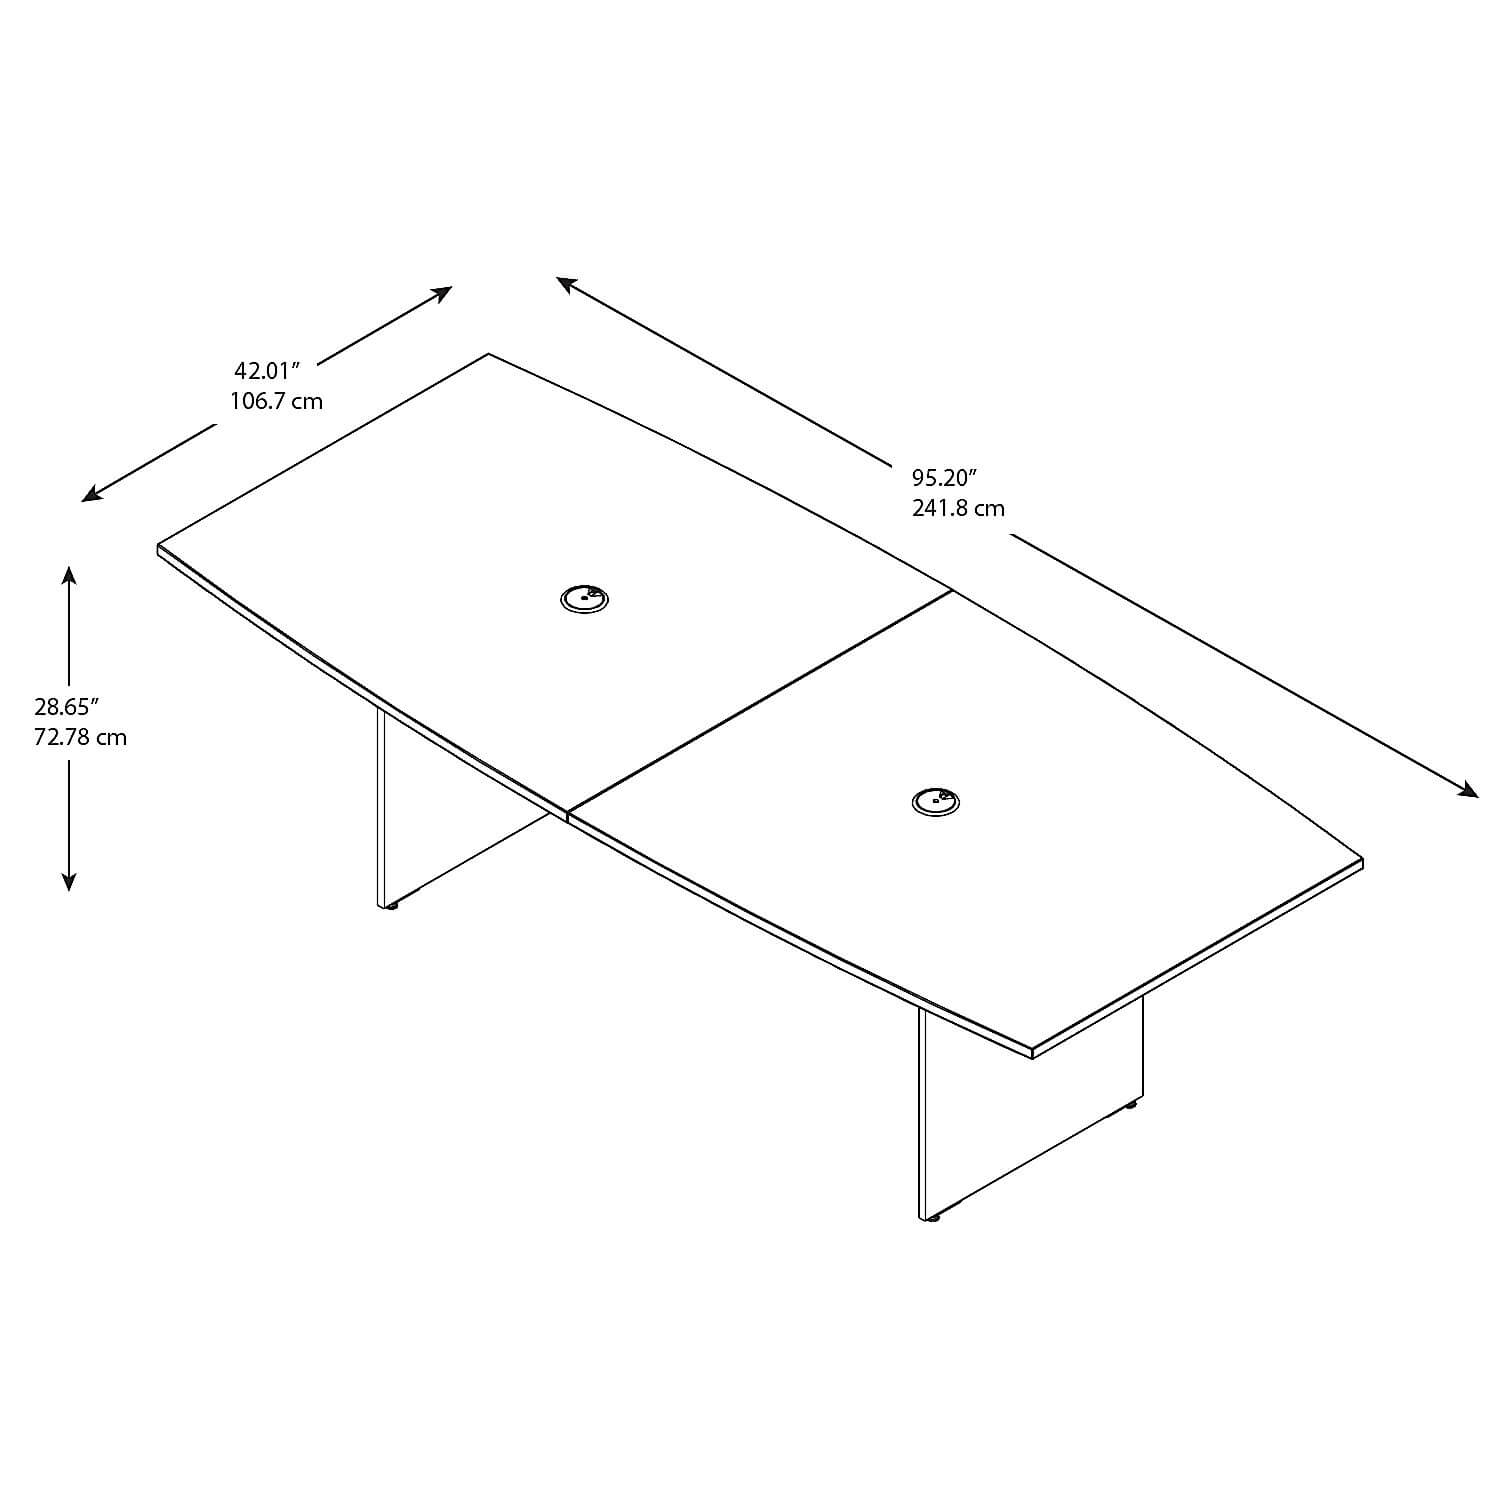 Conference tables dimensions 1 2 3 4 5 6